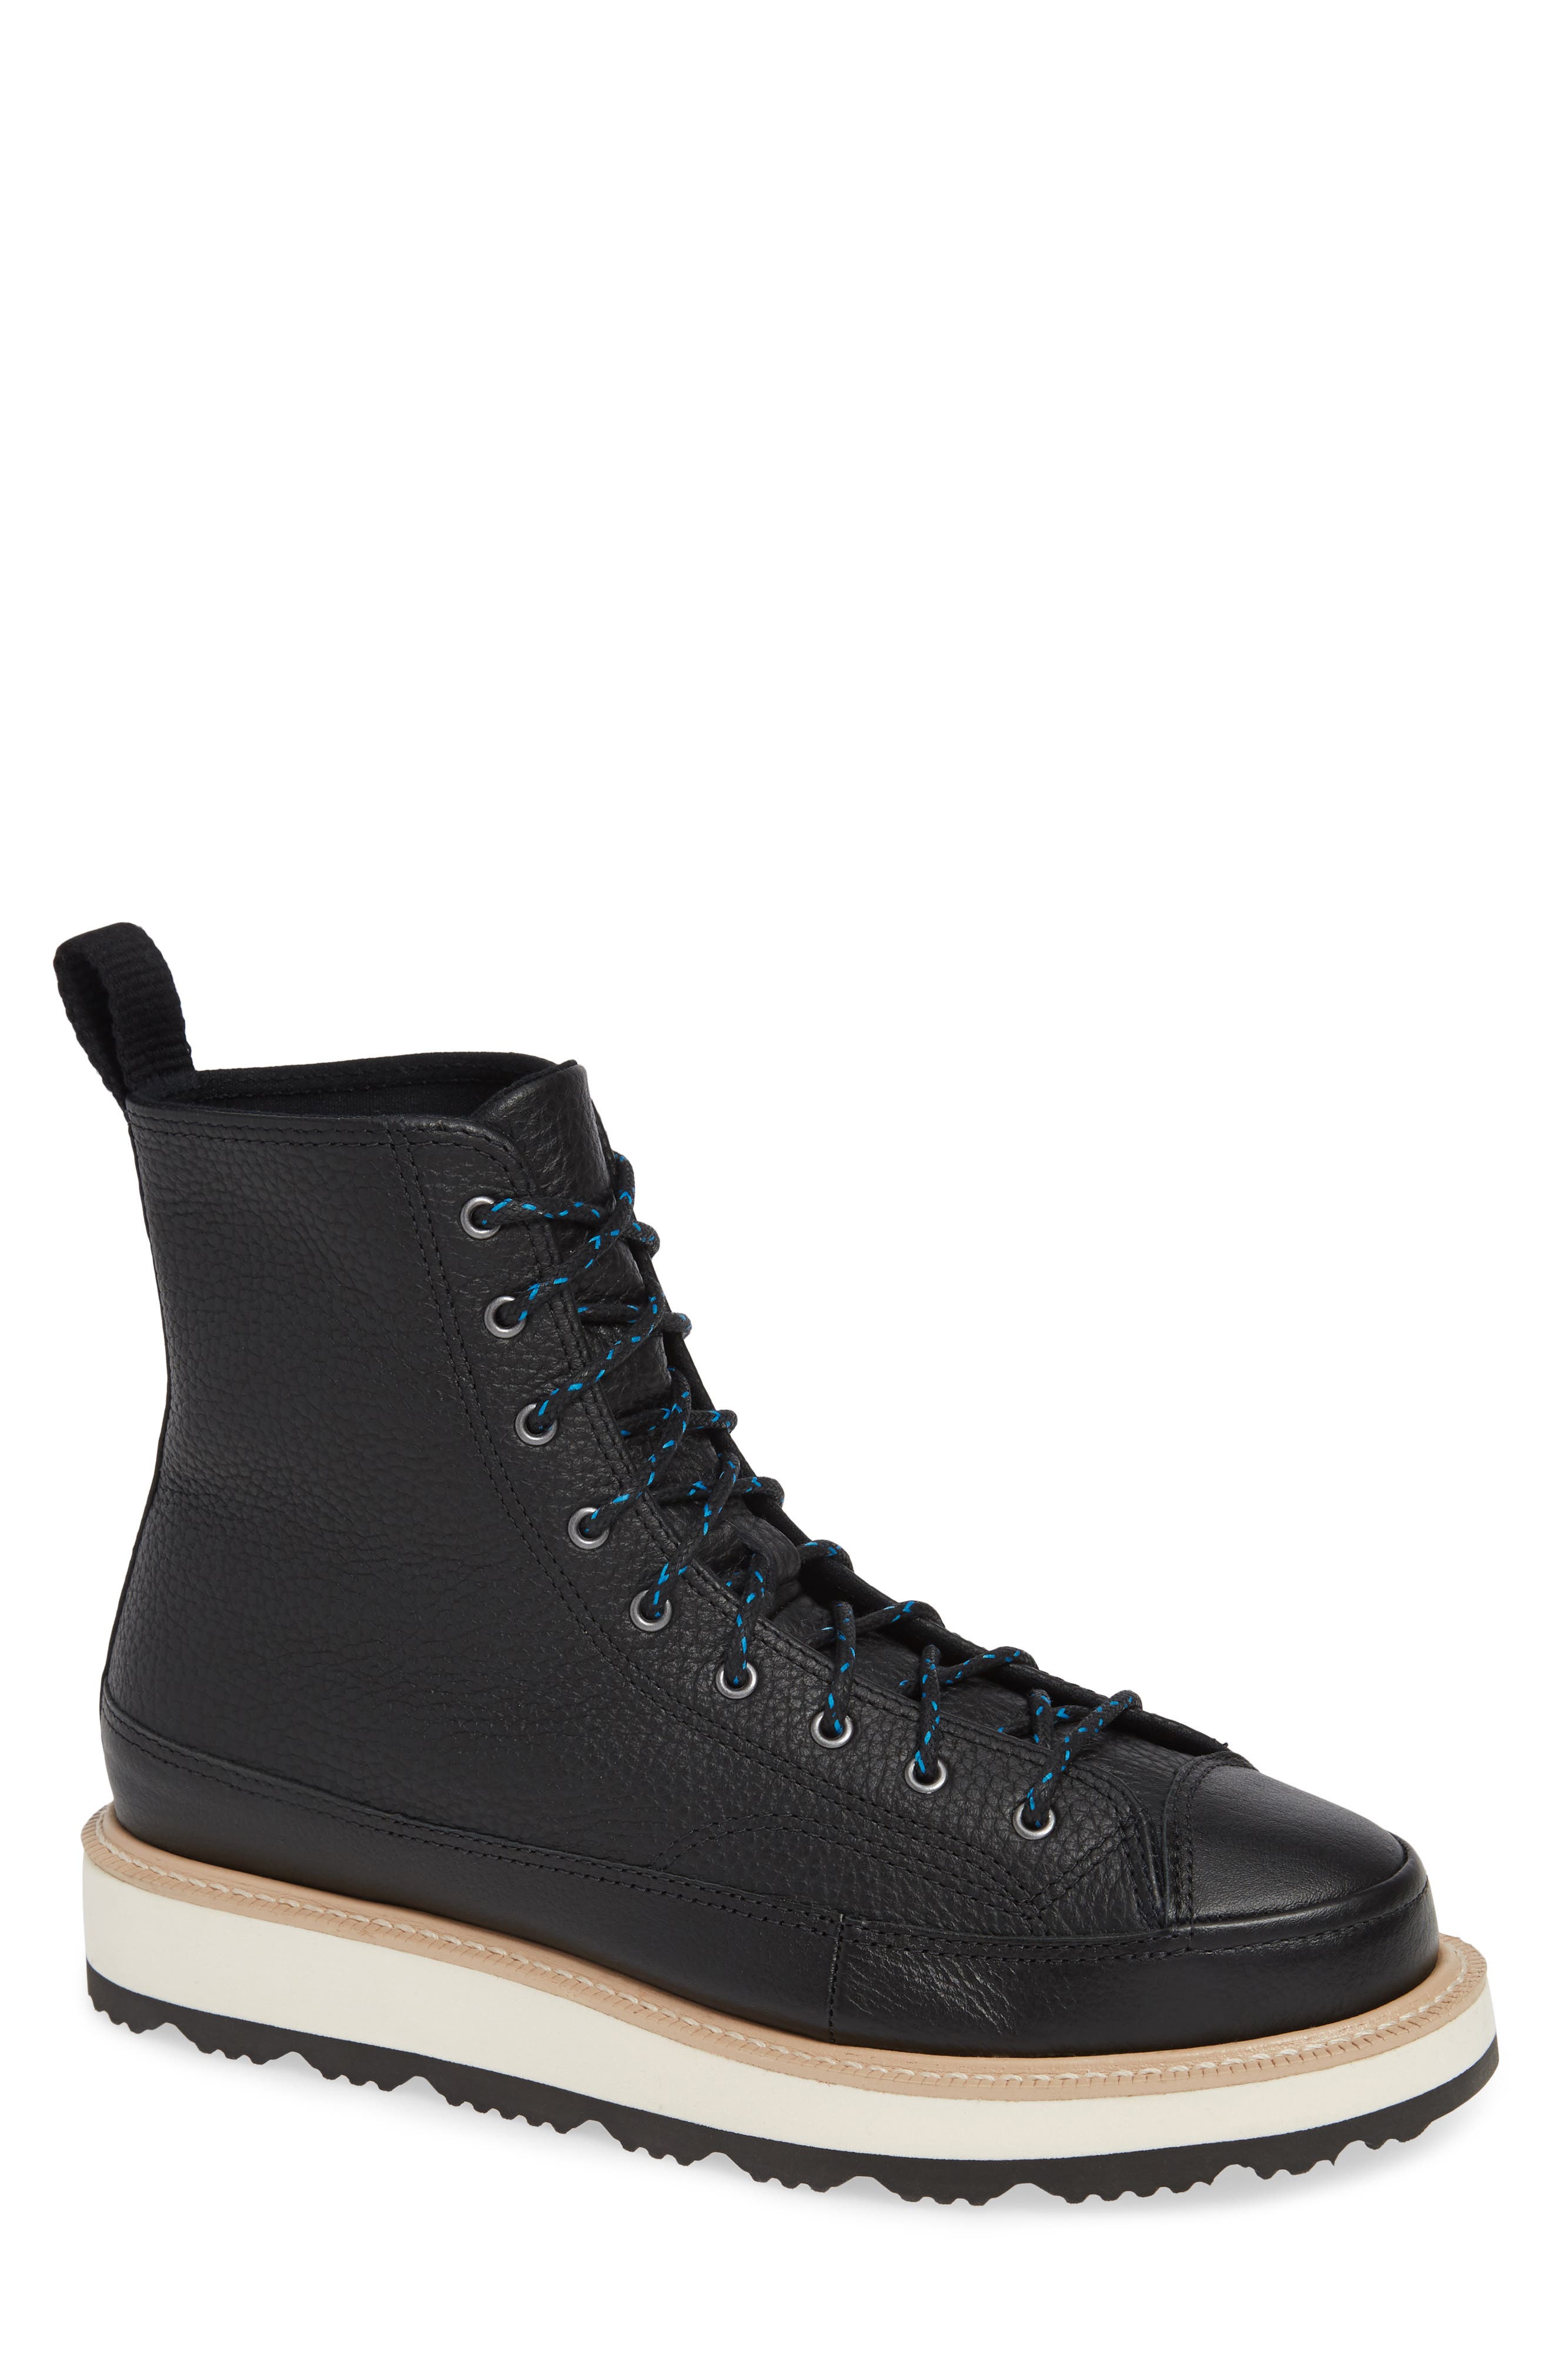 converse crafted boots